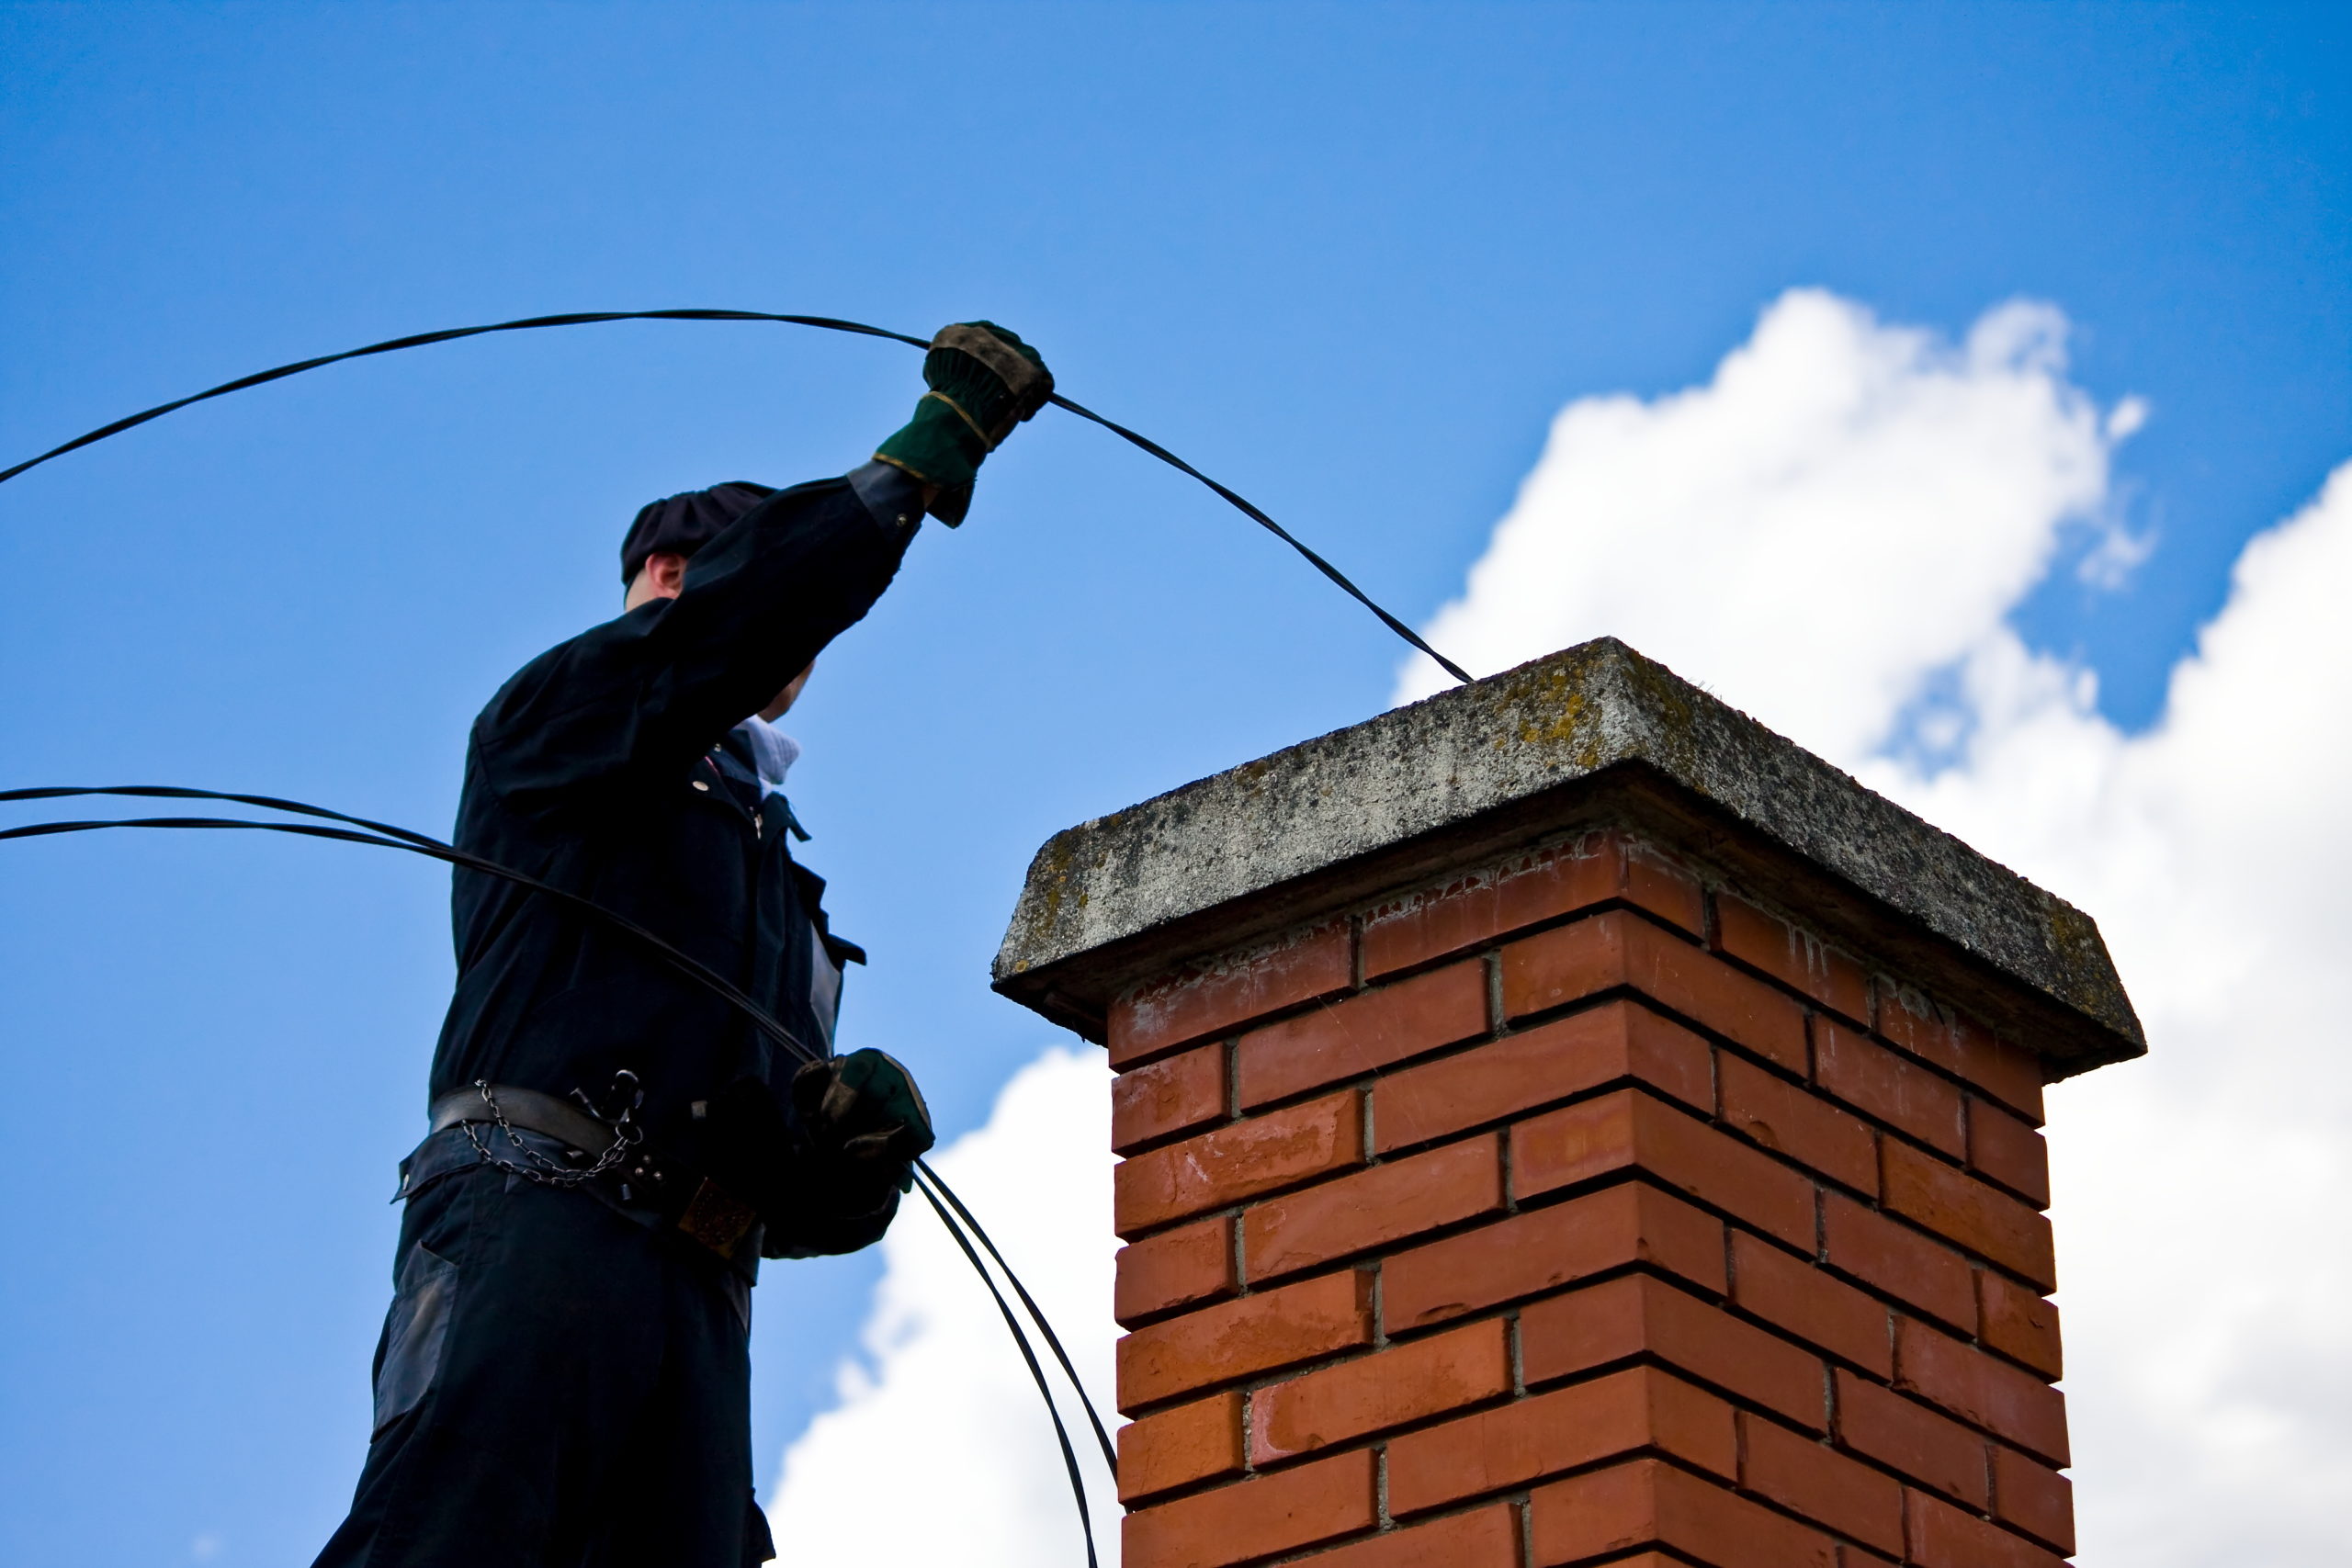 chimney sweeping, chimney cleaning, Chimney Inspection, Chimney Inspections, Fireplace inspection, Fireplace Inspections, hearth Inspections